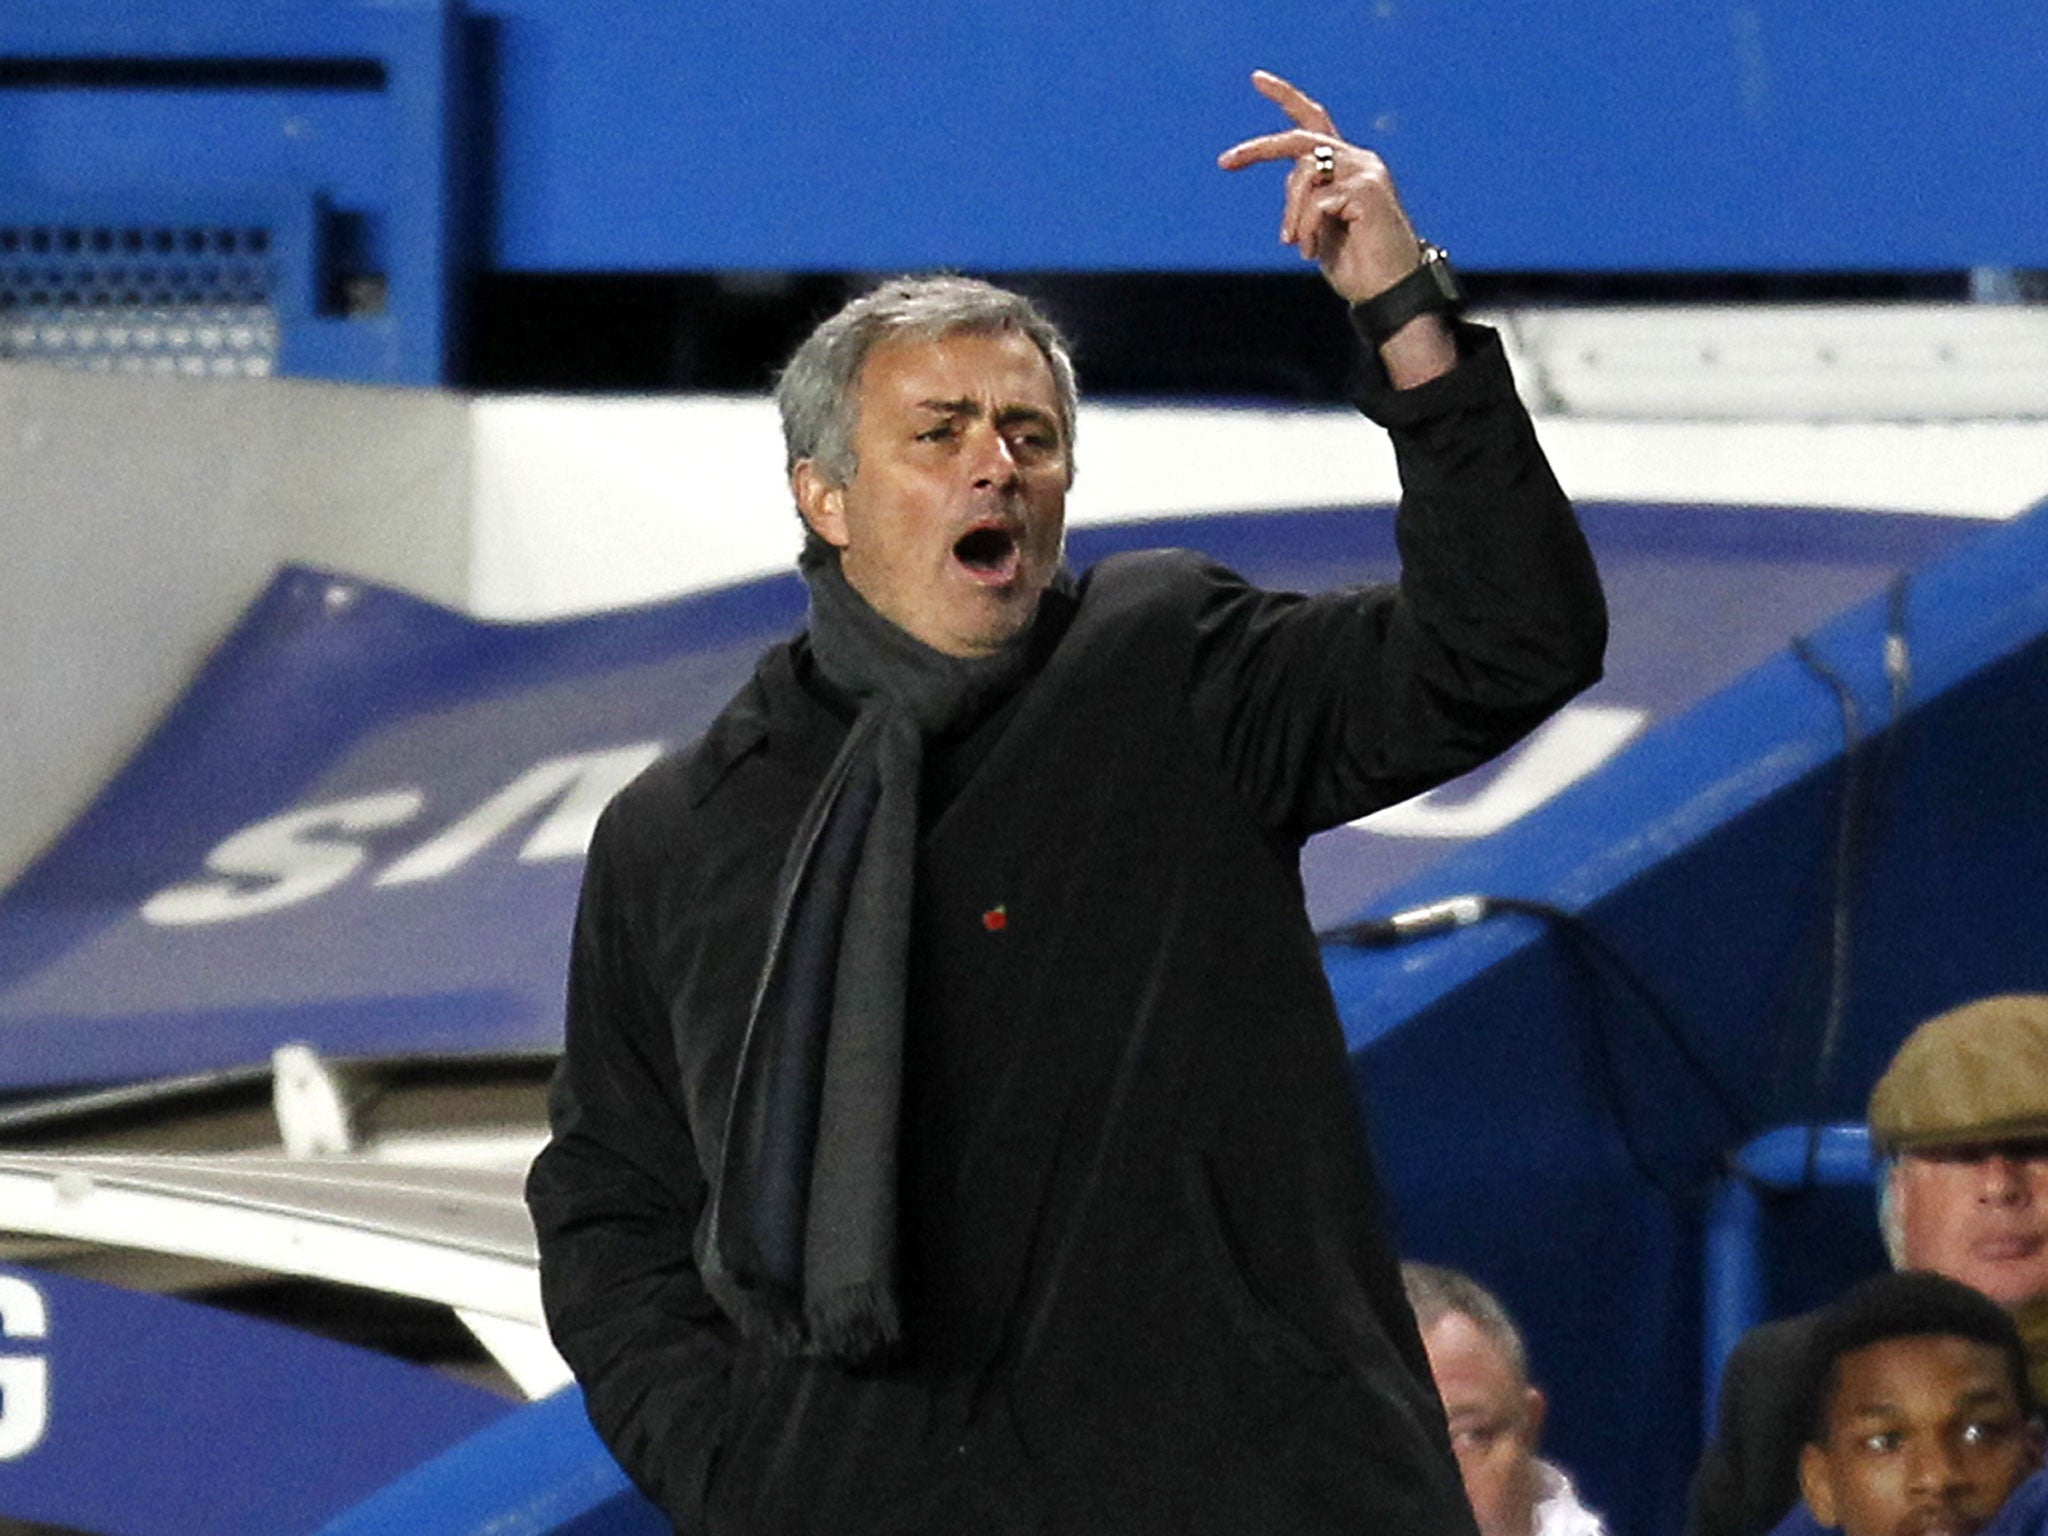 Chelsea manager Jose Mourinho has questioned the atmosphere at Stamford Bridge recently